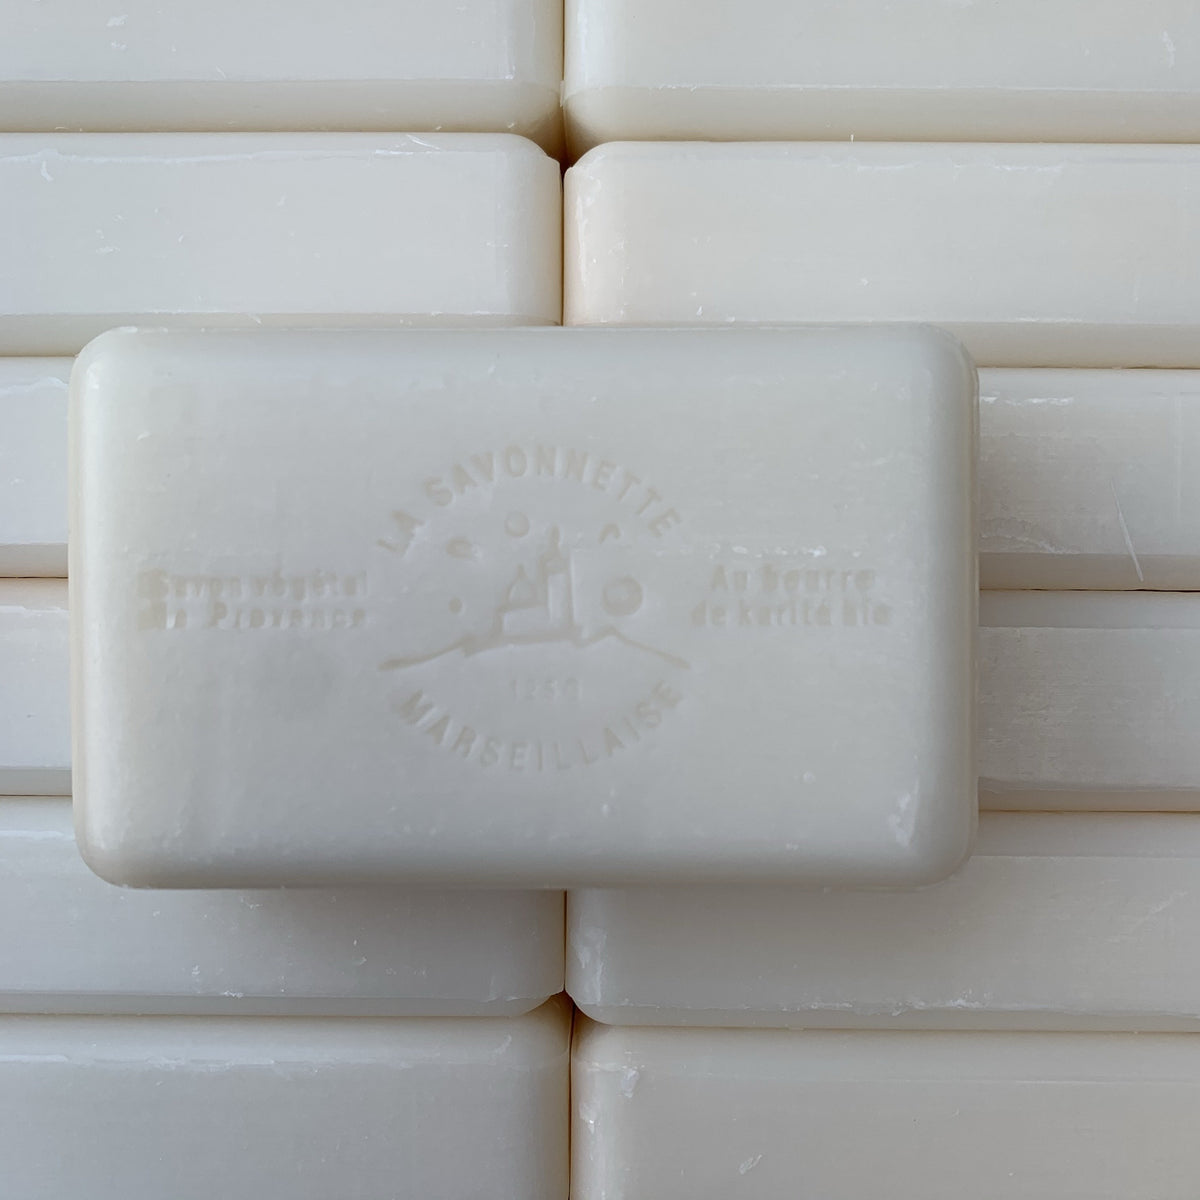 carnation classic french soap